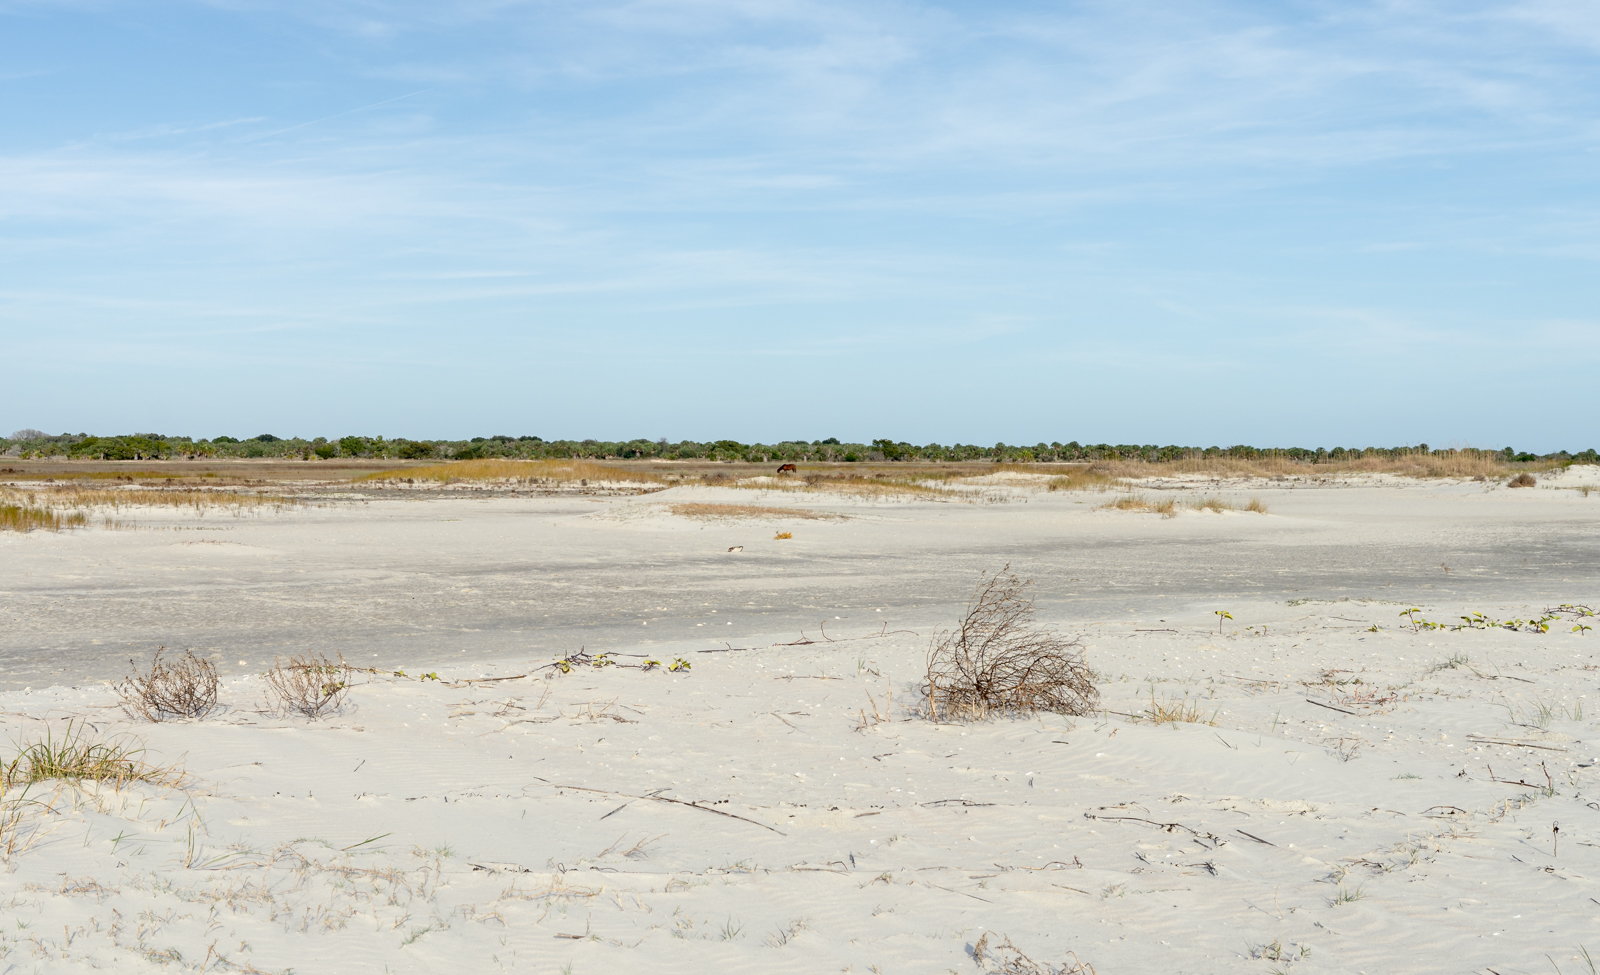 There is a small brown horse in the center of the photograph. Most of the foreground is white sandy beach with some dried grass and dead vegetation.